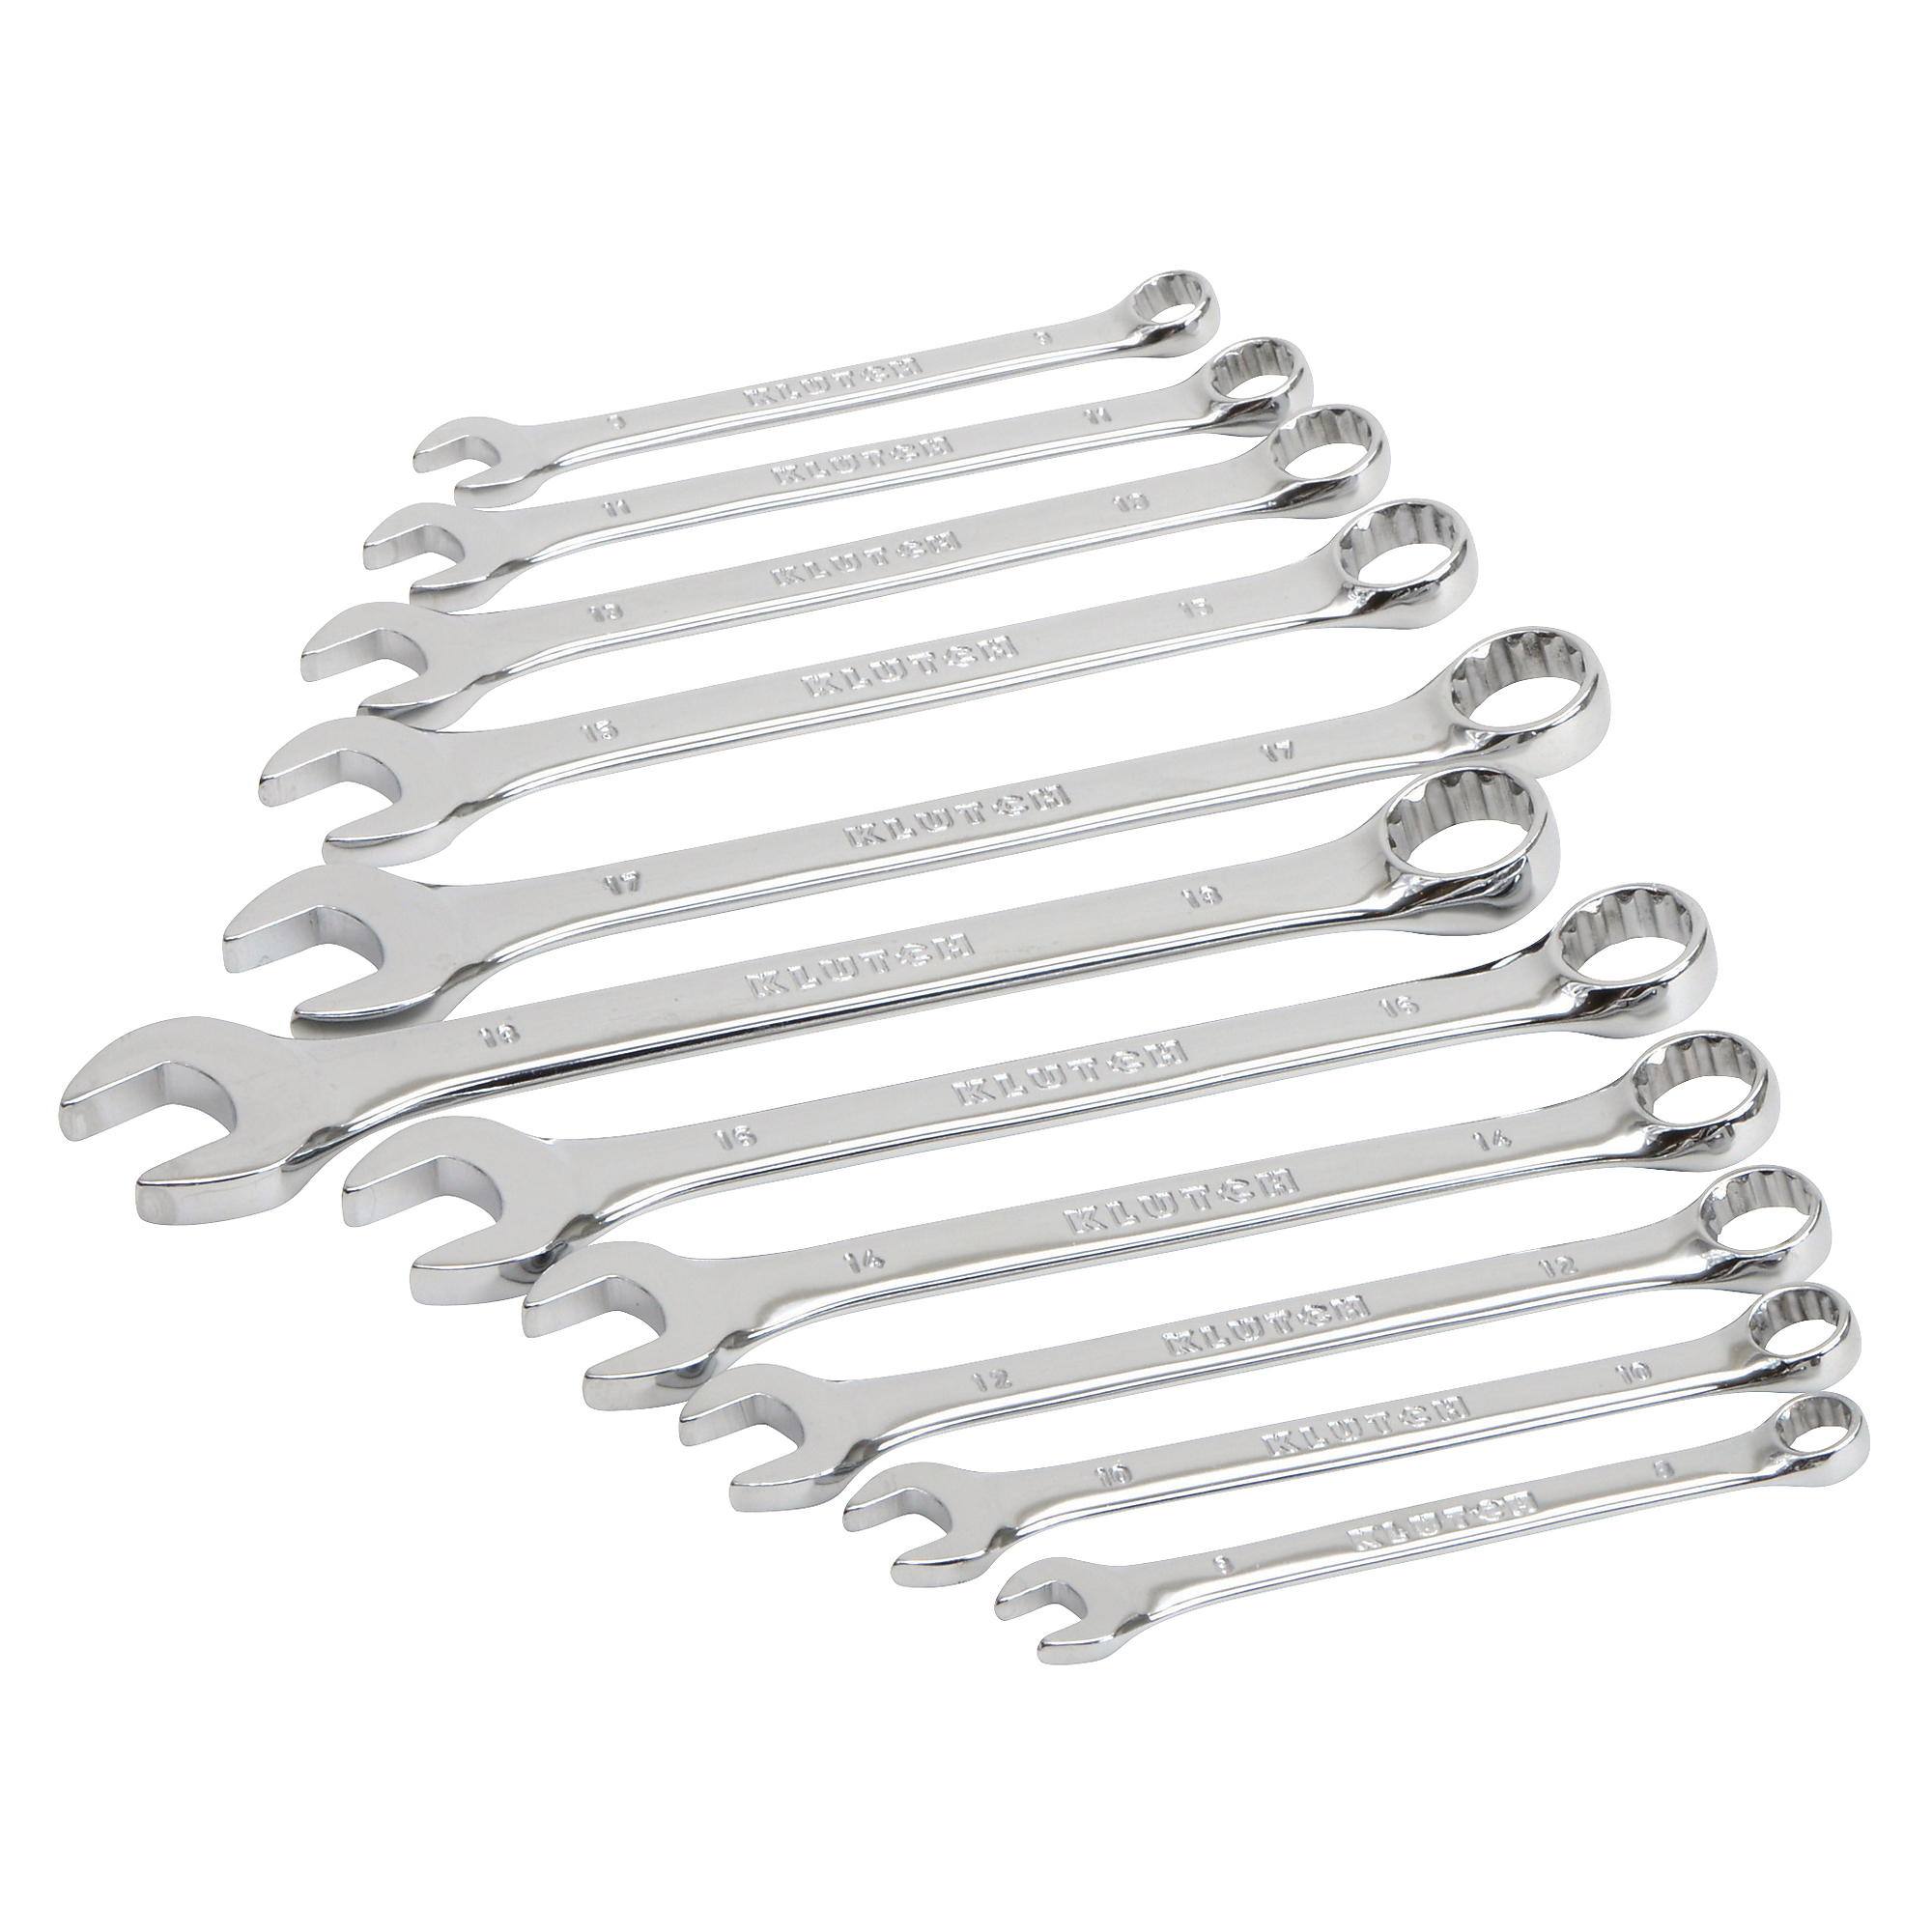 Klutch 11-Piece Combination Metric Wrench Set with Full Polish, Model E-2004